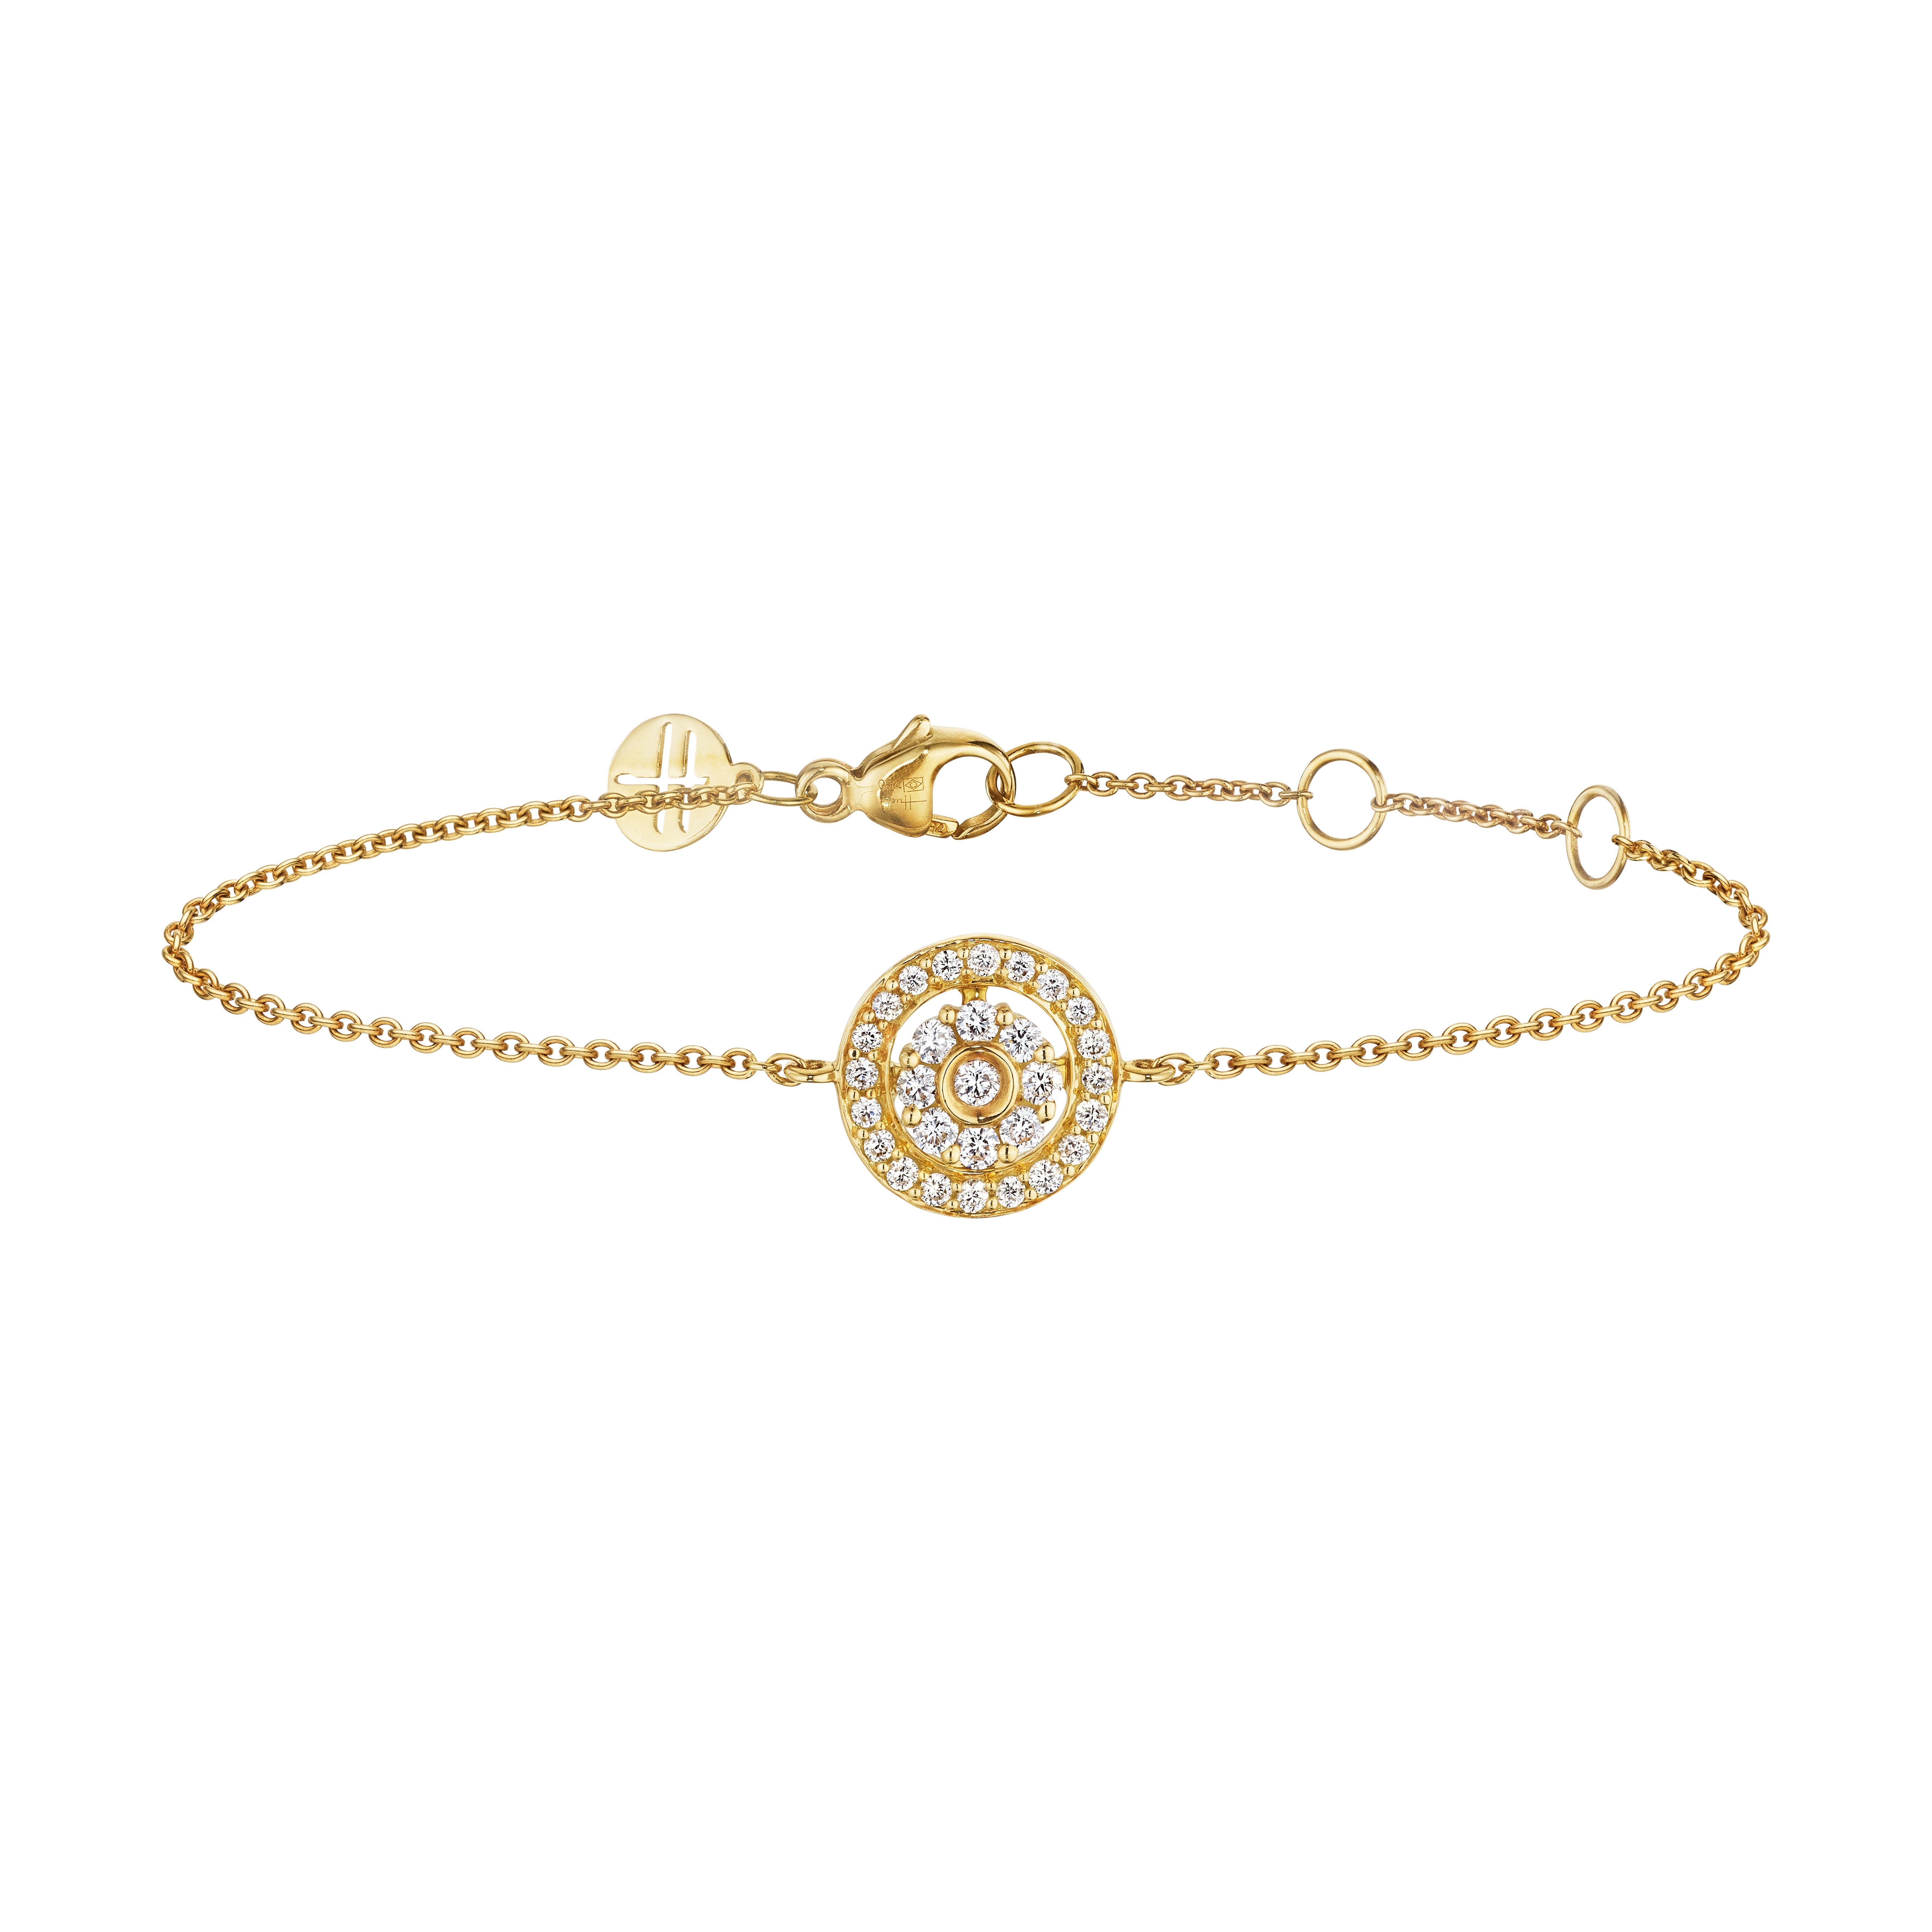 With its contemporary designs paired with the simplicity of daisies, the Diamond Flower Collection combines classic and modern notes in an array of dainty 18k gold diamond studded pieces.
